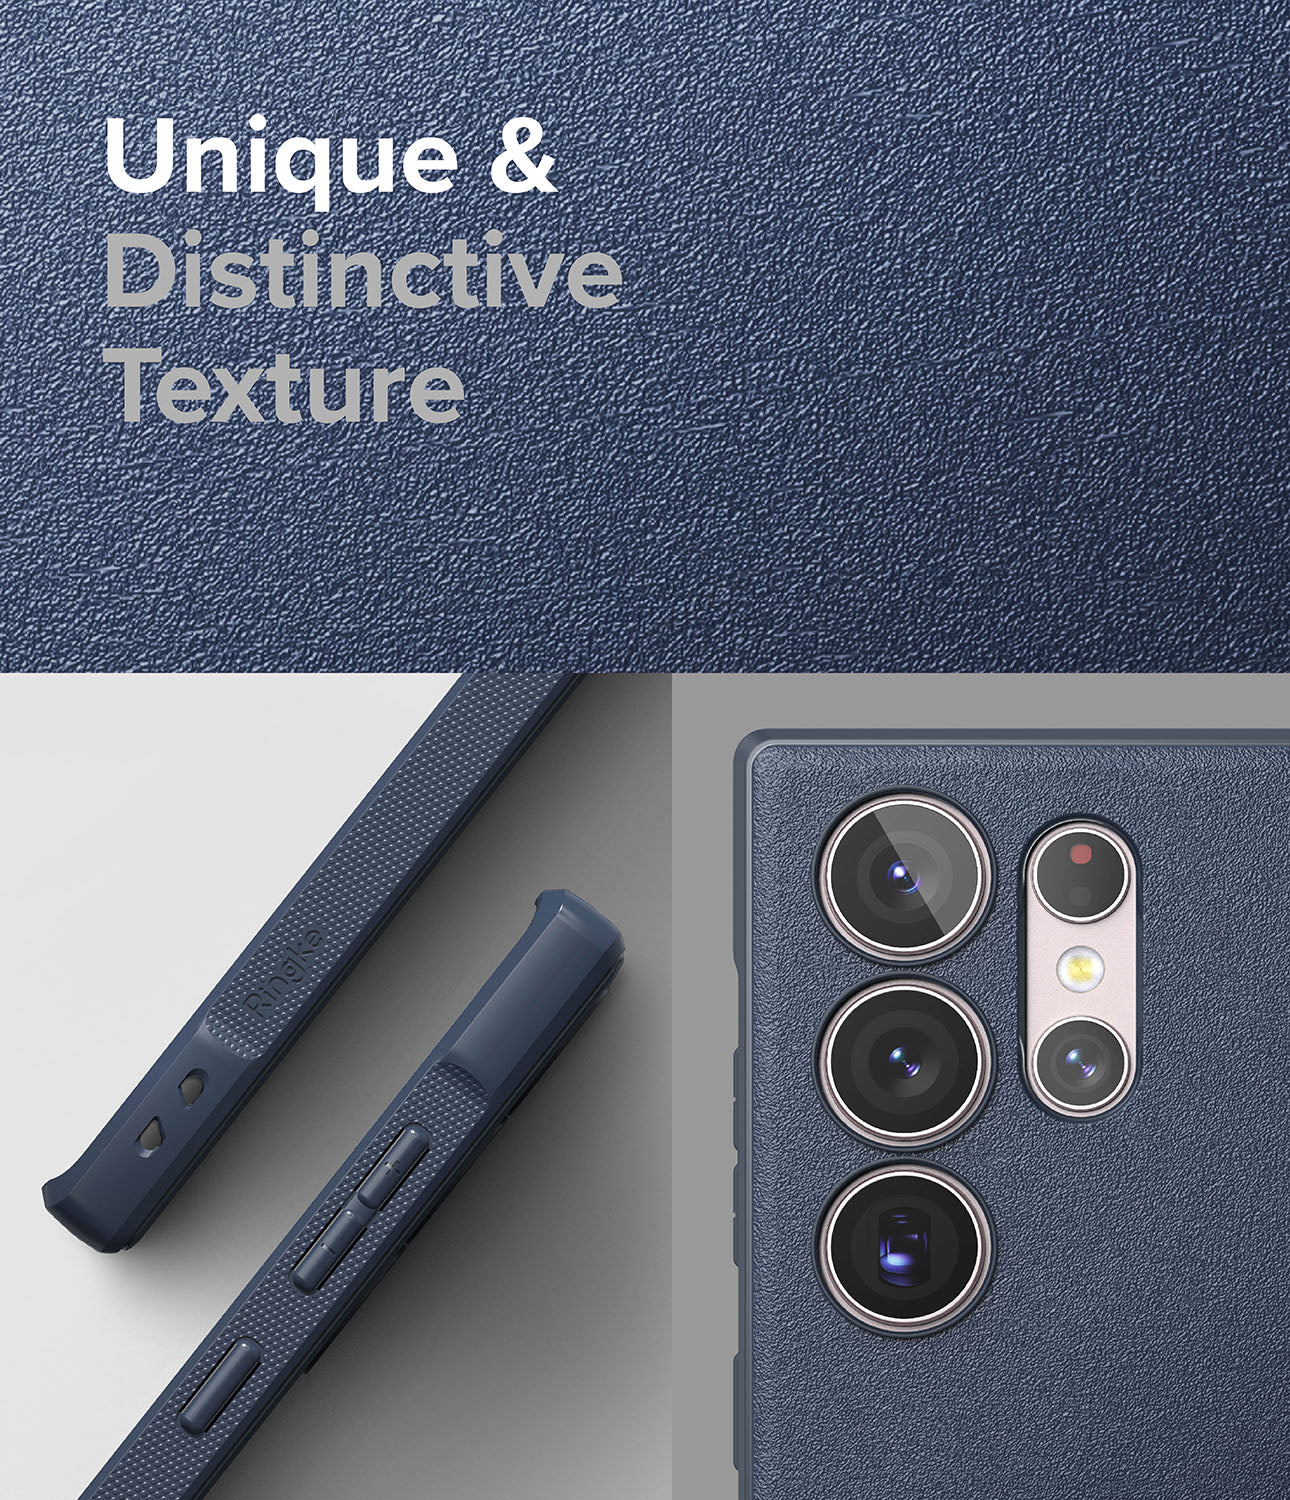 Galaxy S23 Ultra Case | Onyx - Navy - Unique and Distinctive Texture.